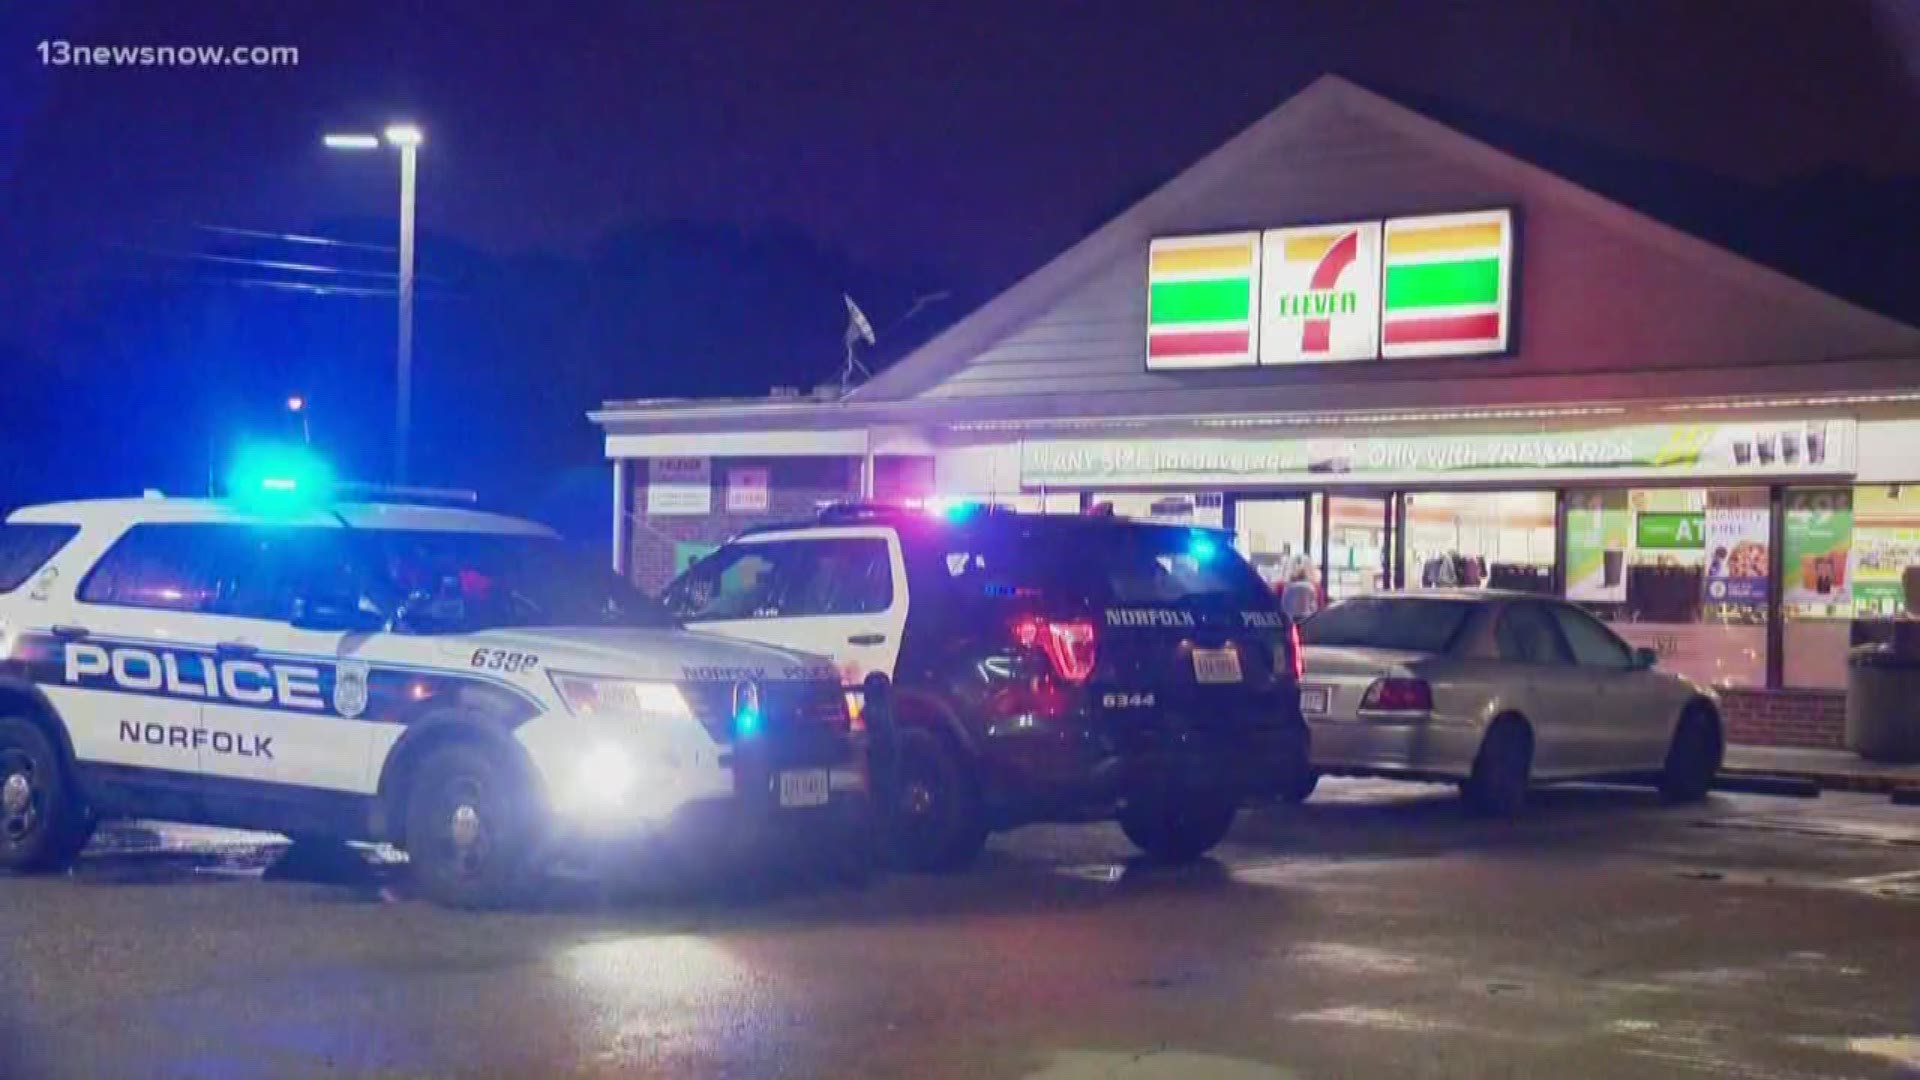 person stabbed at norfolk 7 eleven 13newsnow com overnight stabbing at norfolk 7 eleven